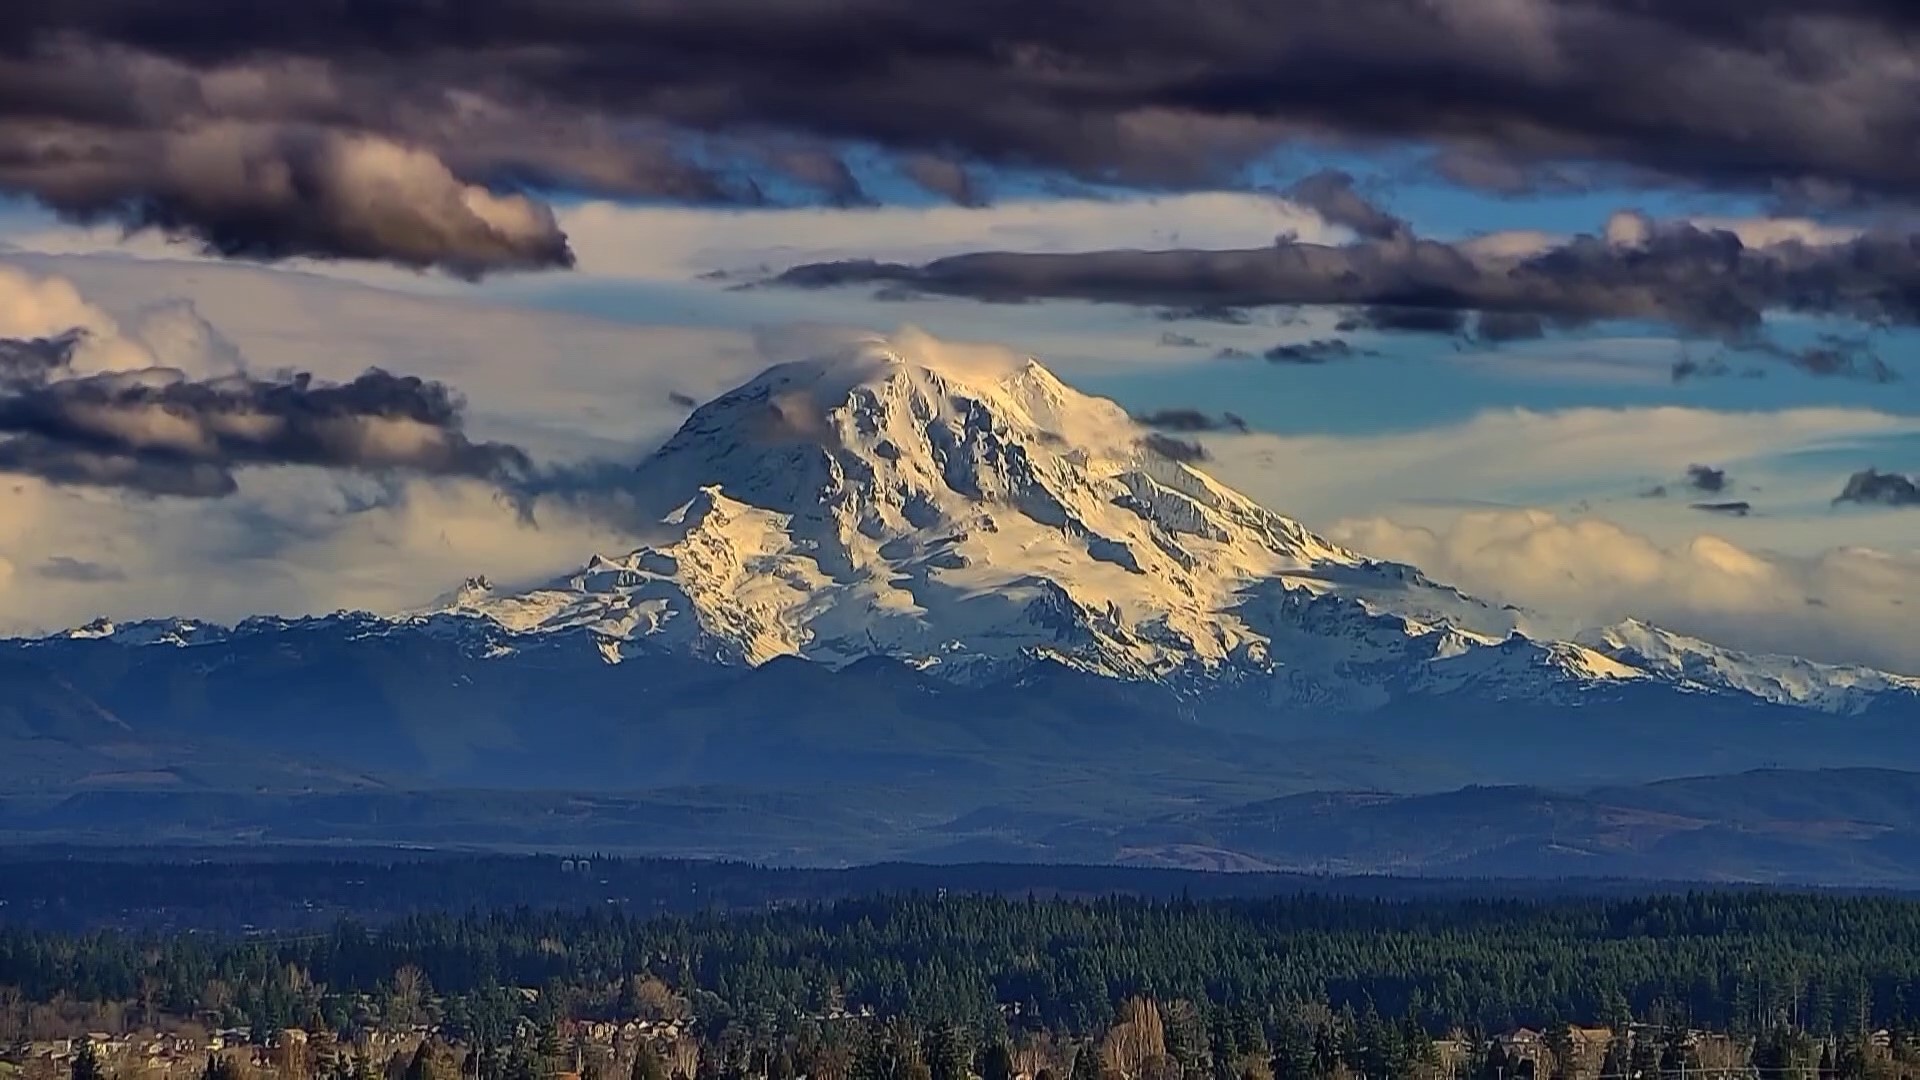 Take a few minutes and watch the clouds drift over Mount Rainier, seen from KING 5's Tacoma tower cam.